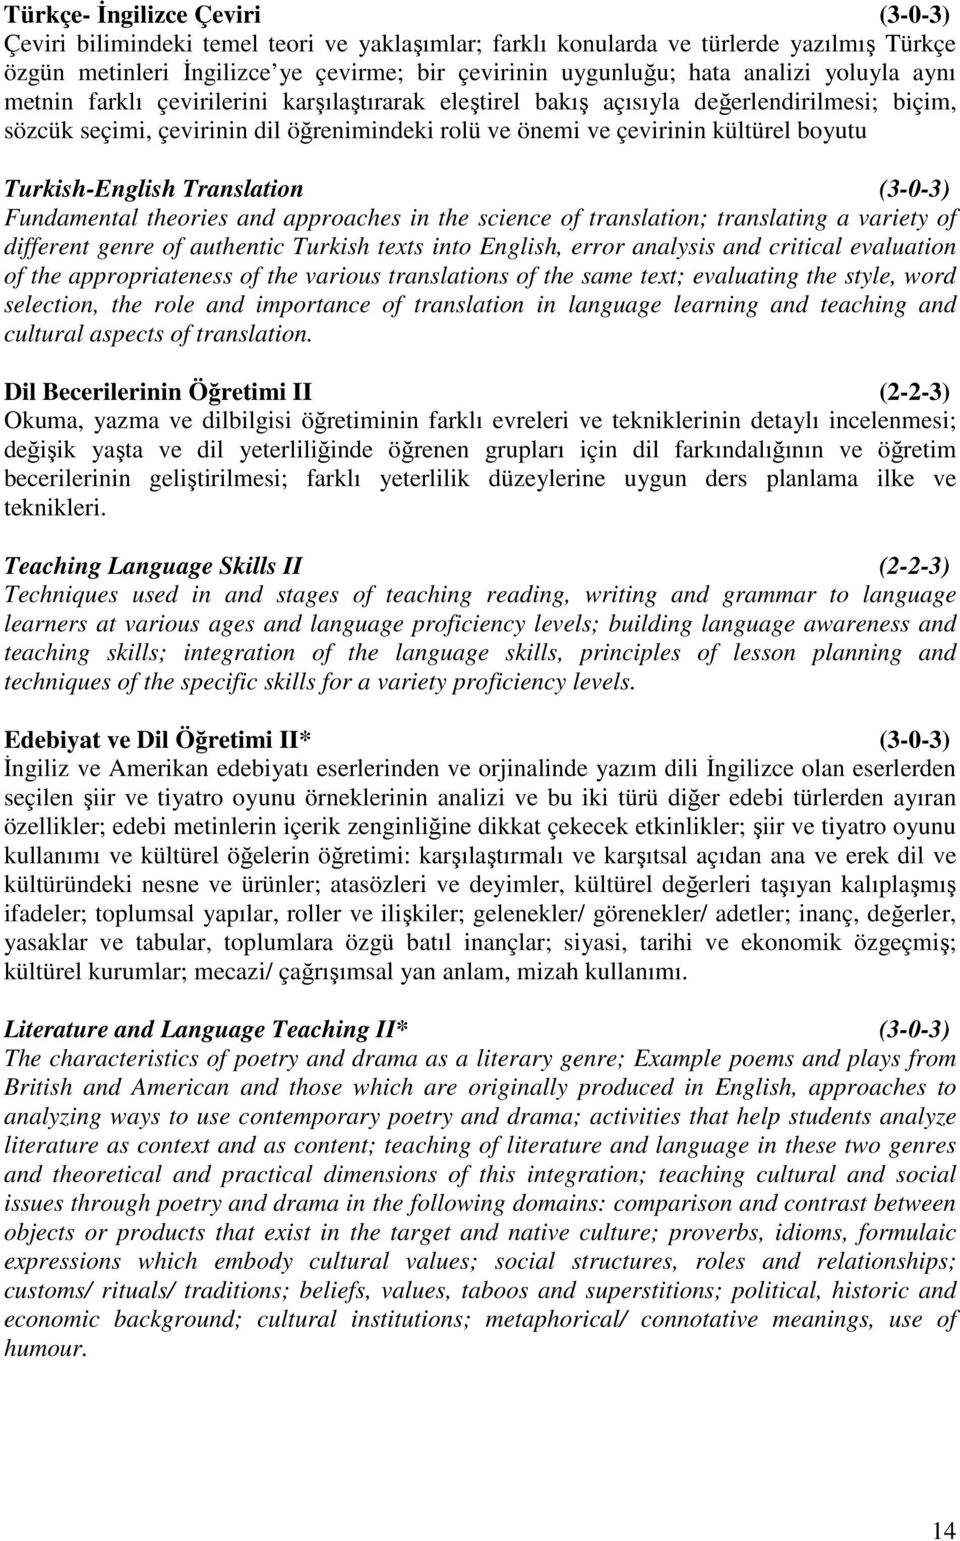 boyutu Turkish-English Translation (3-0-3) Fundamental theories and approaches in the science of translation; translating a variety of different genre of authentic Turkish texts into English, error